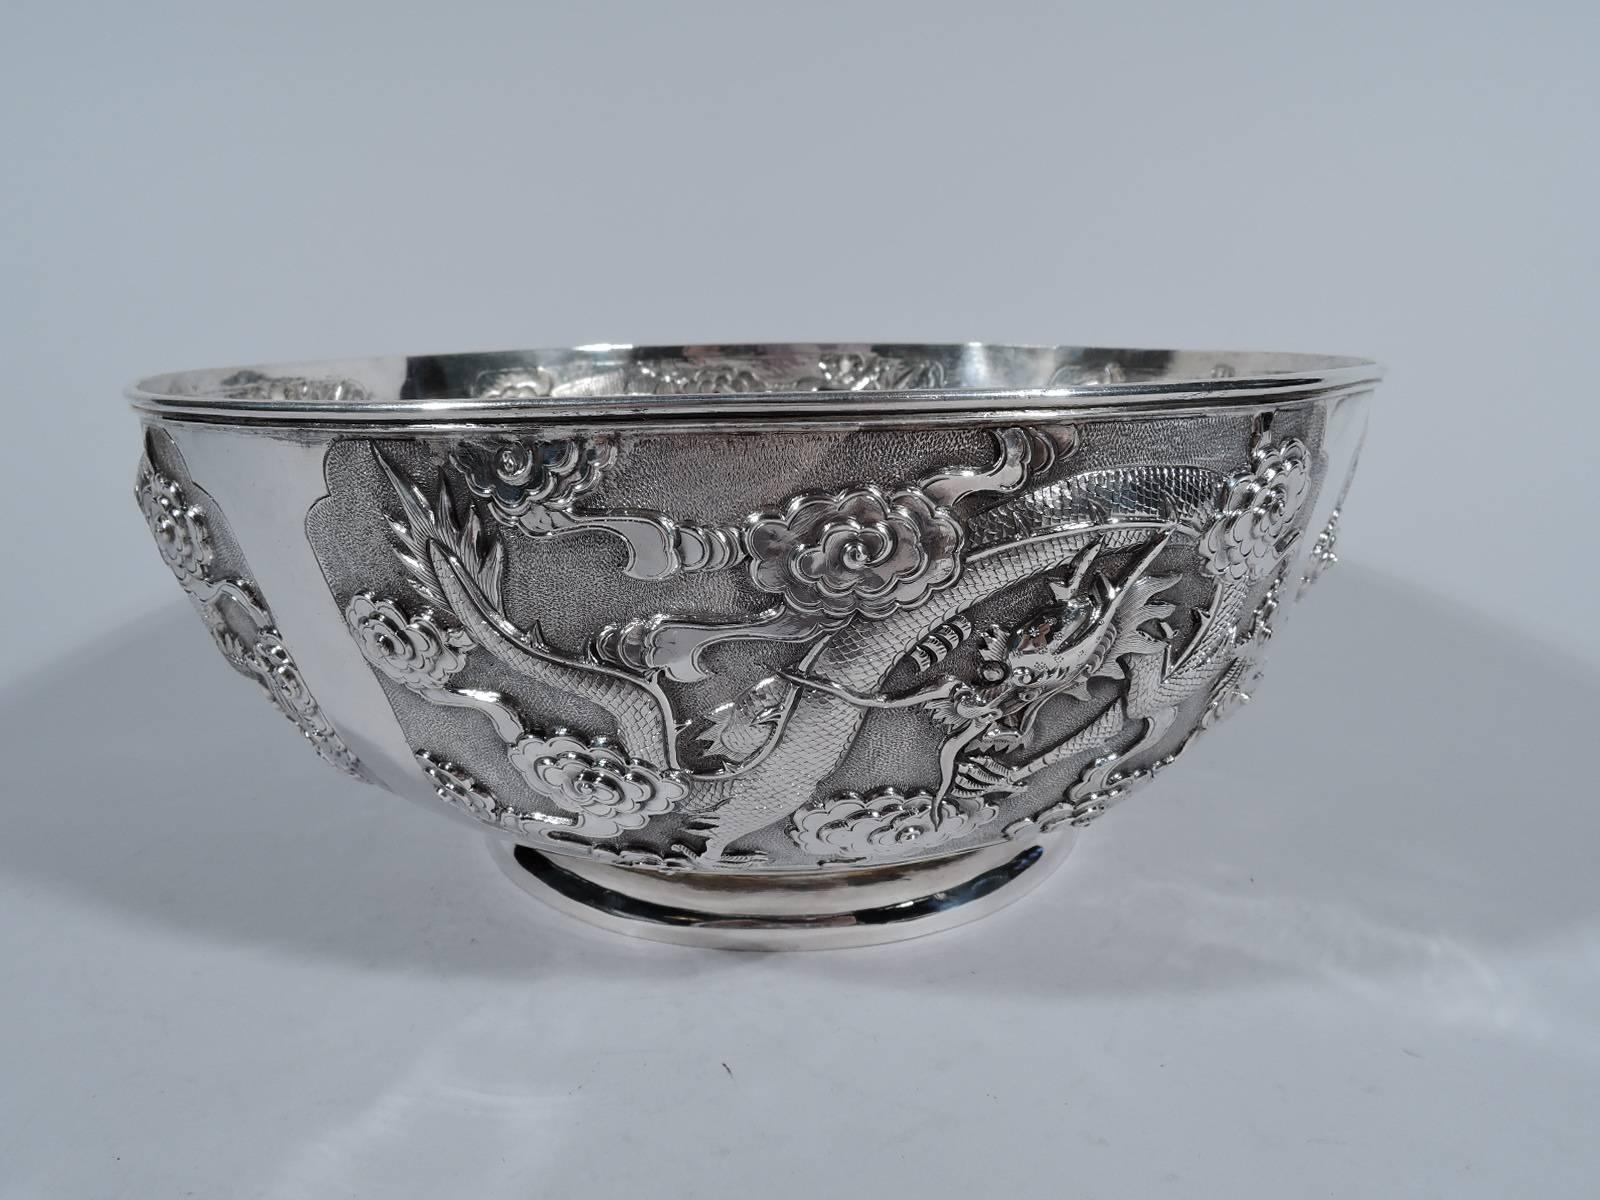 Fine quality Chinese export silver bowl, circa 1900. Curved sides and raised and spread foot. Four shaped frames inhabited by scaly, slithering dragons and clouds on stippled ground. Marked with Chinese characters and 3 letters of which the last two